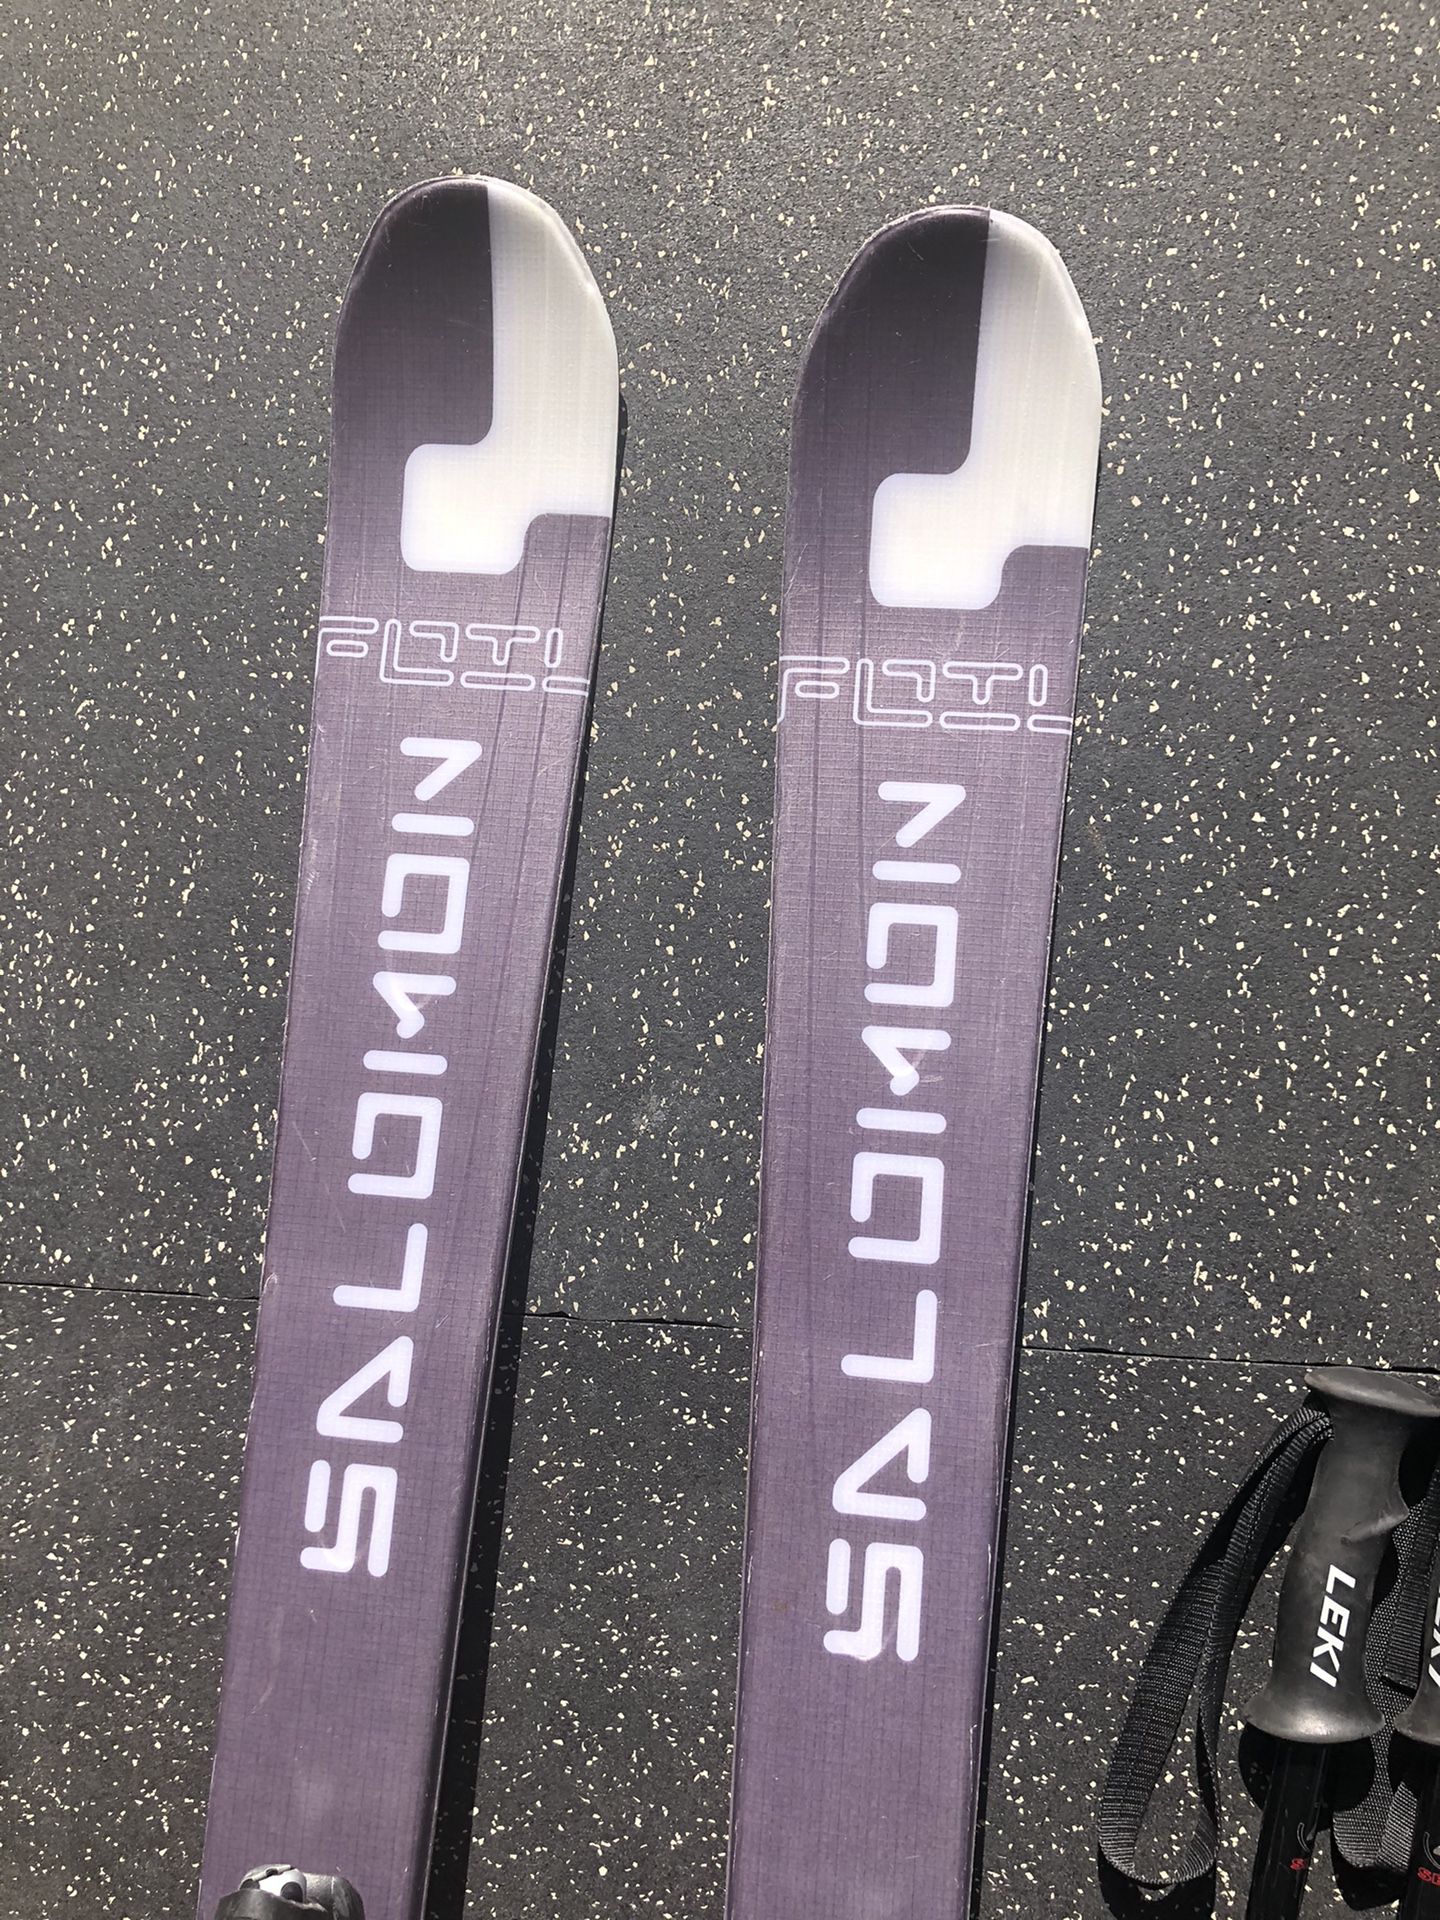 SALOMON FOIL 1080 twin tip skis for in San Diego, CA - OfferUp